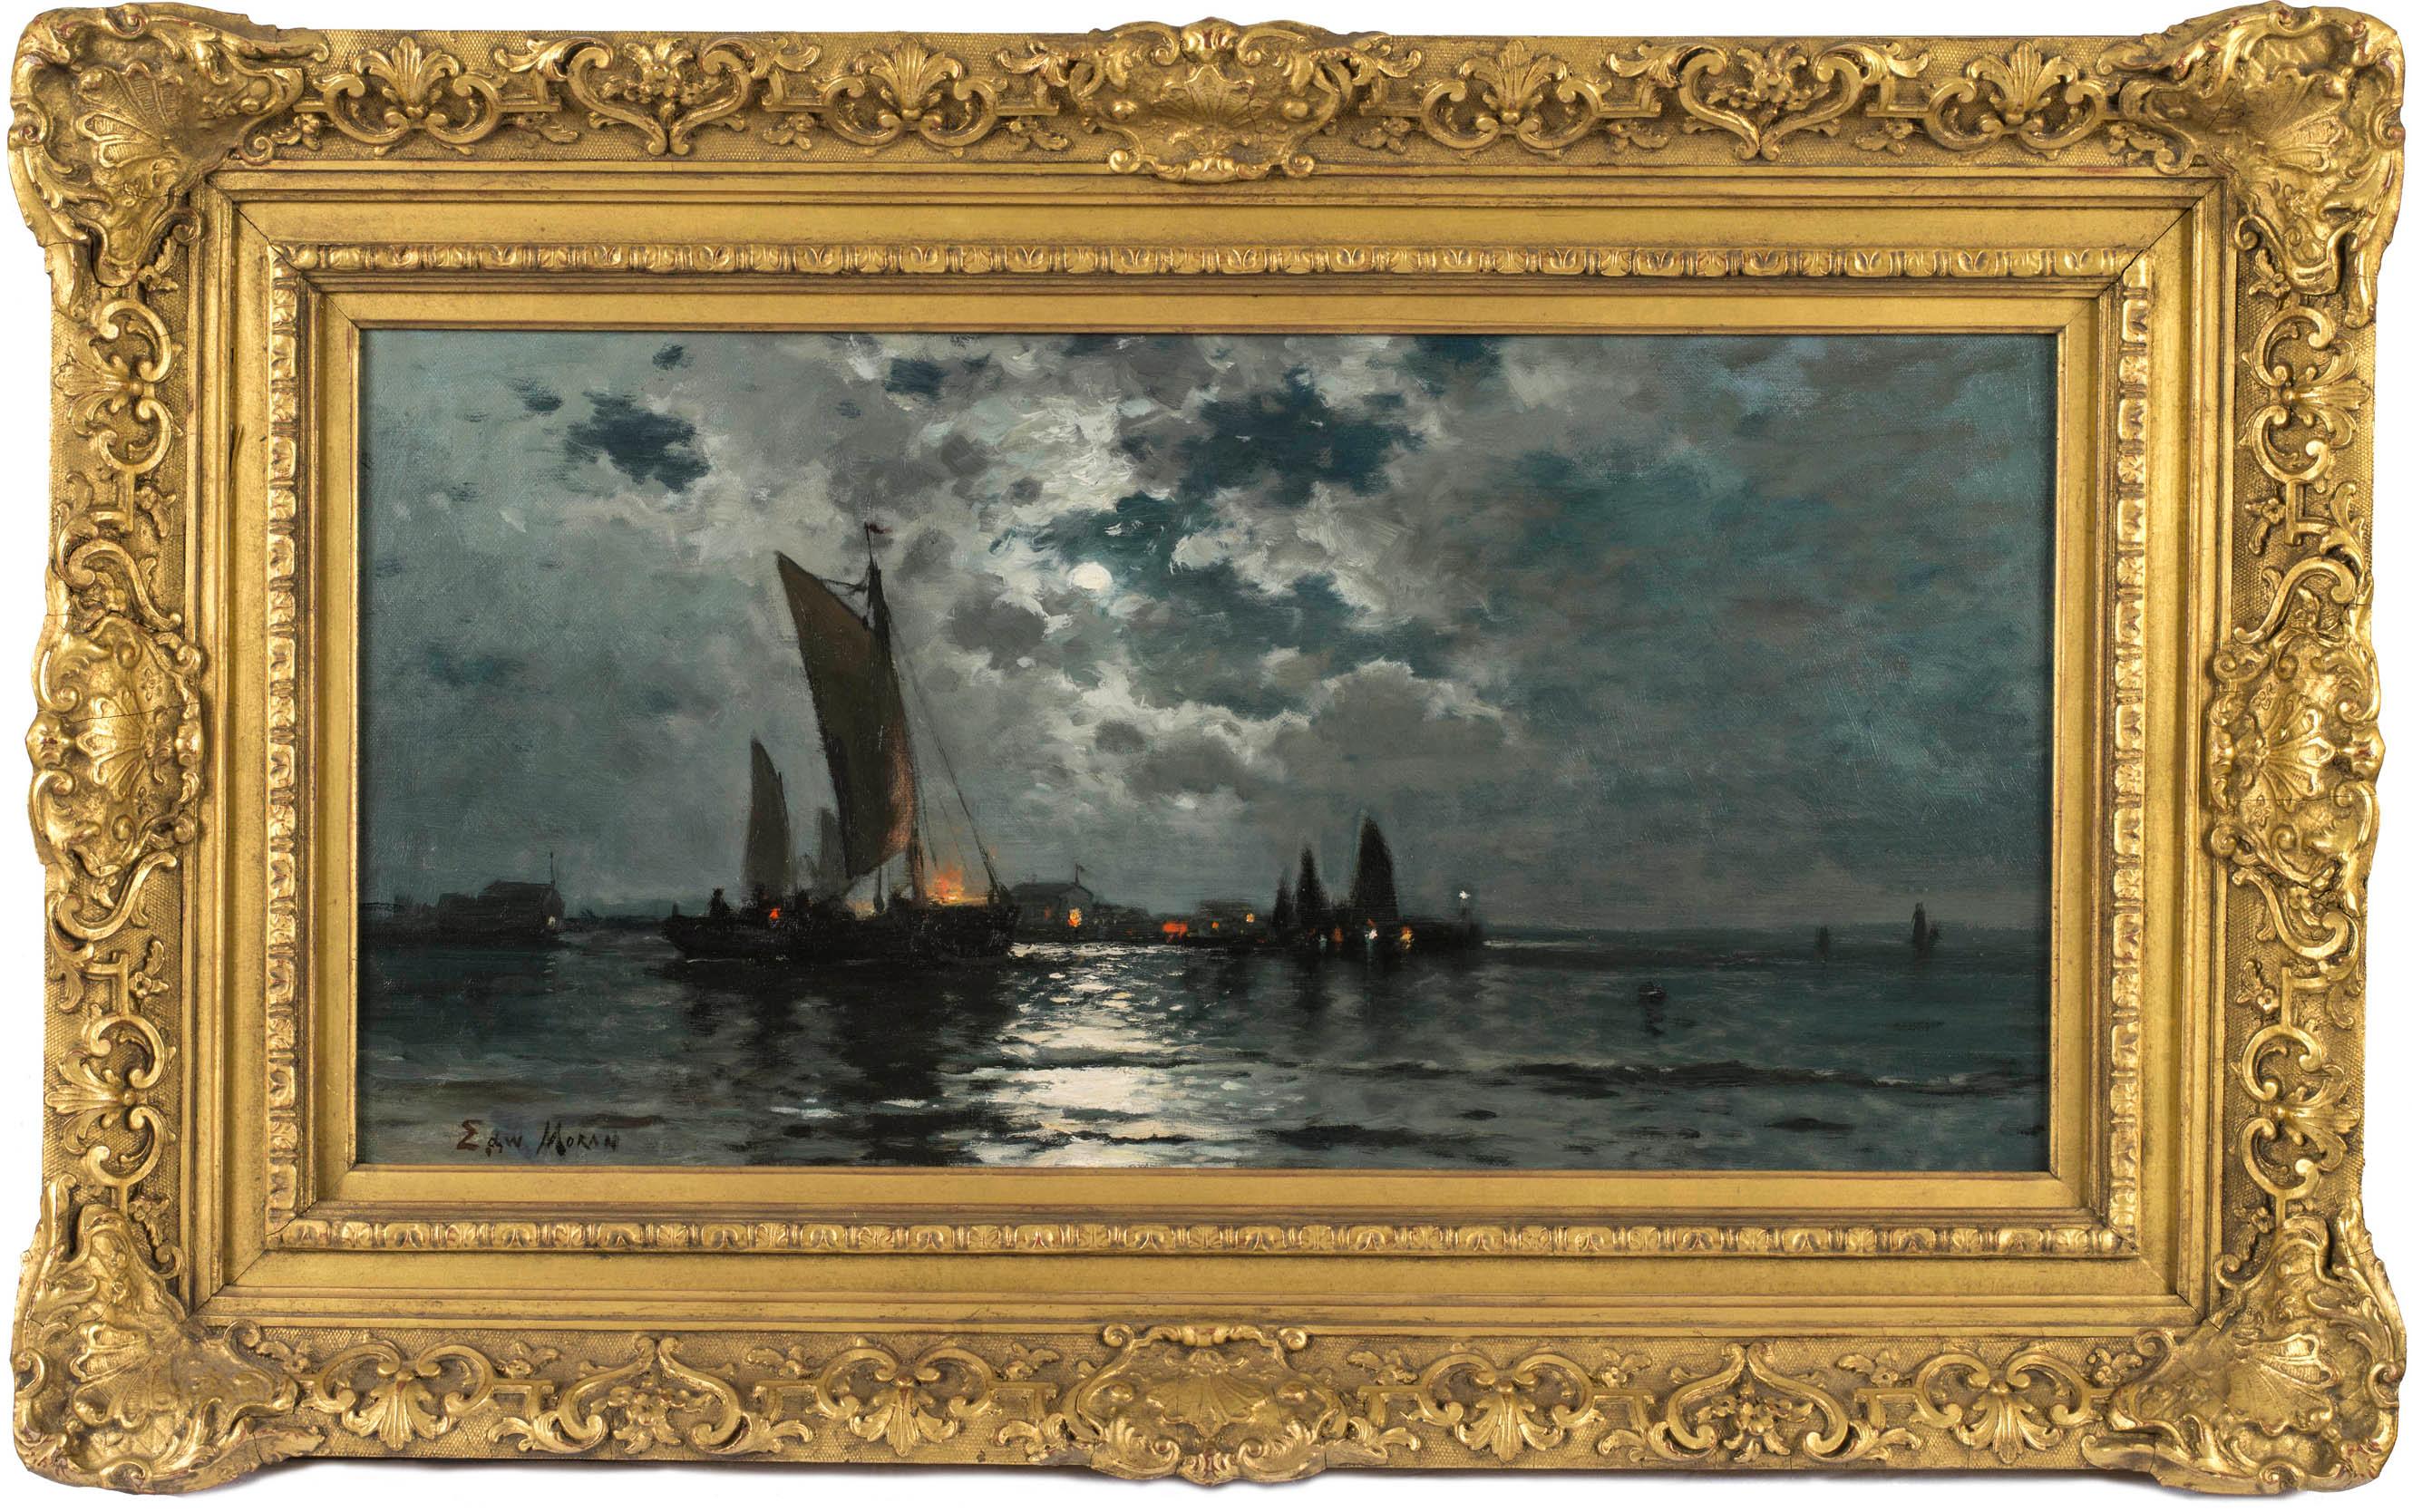 Edward Moran (1829-1901)
Ships in Moonlight
Oil on canvas
12 x 24 inches
Signed Edw Moran at lower left
